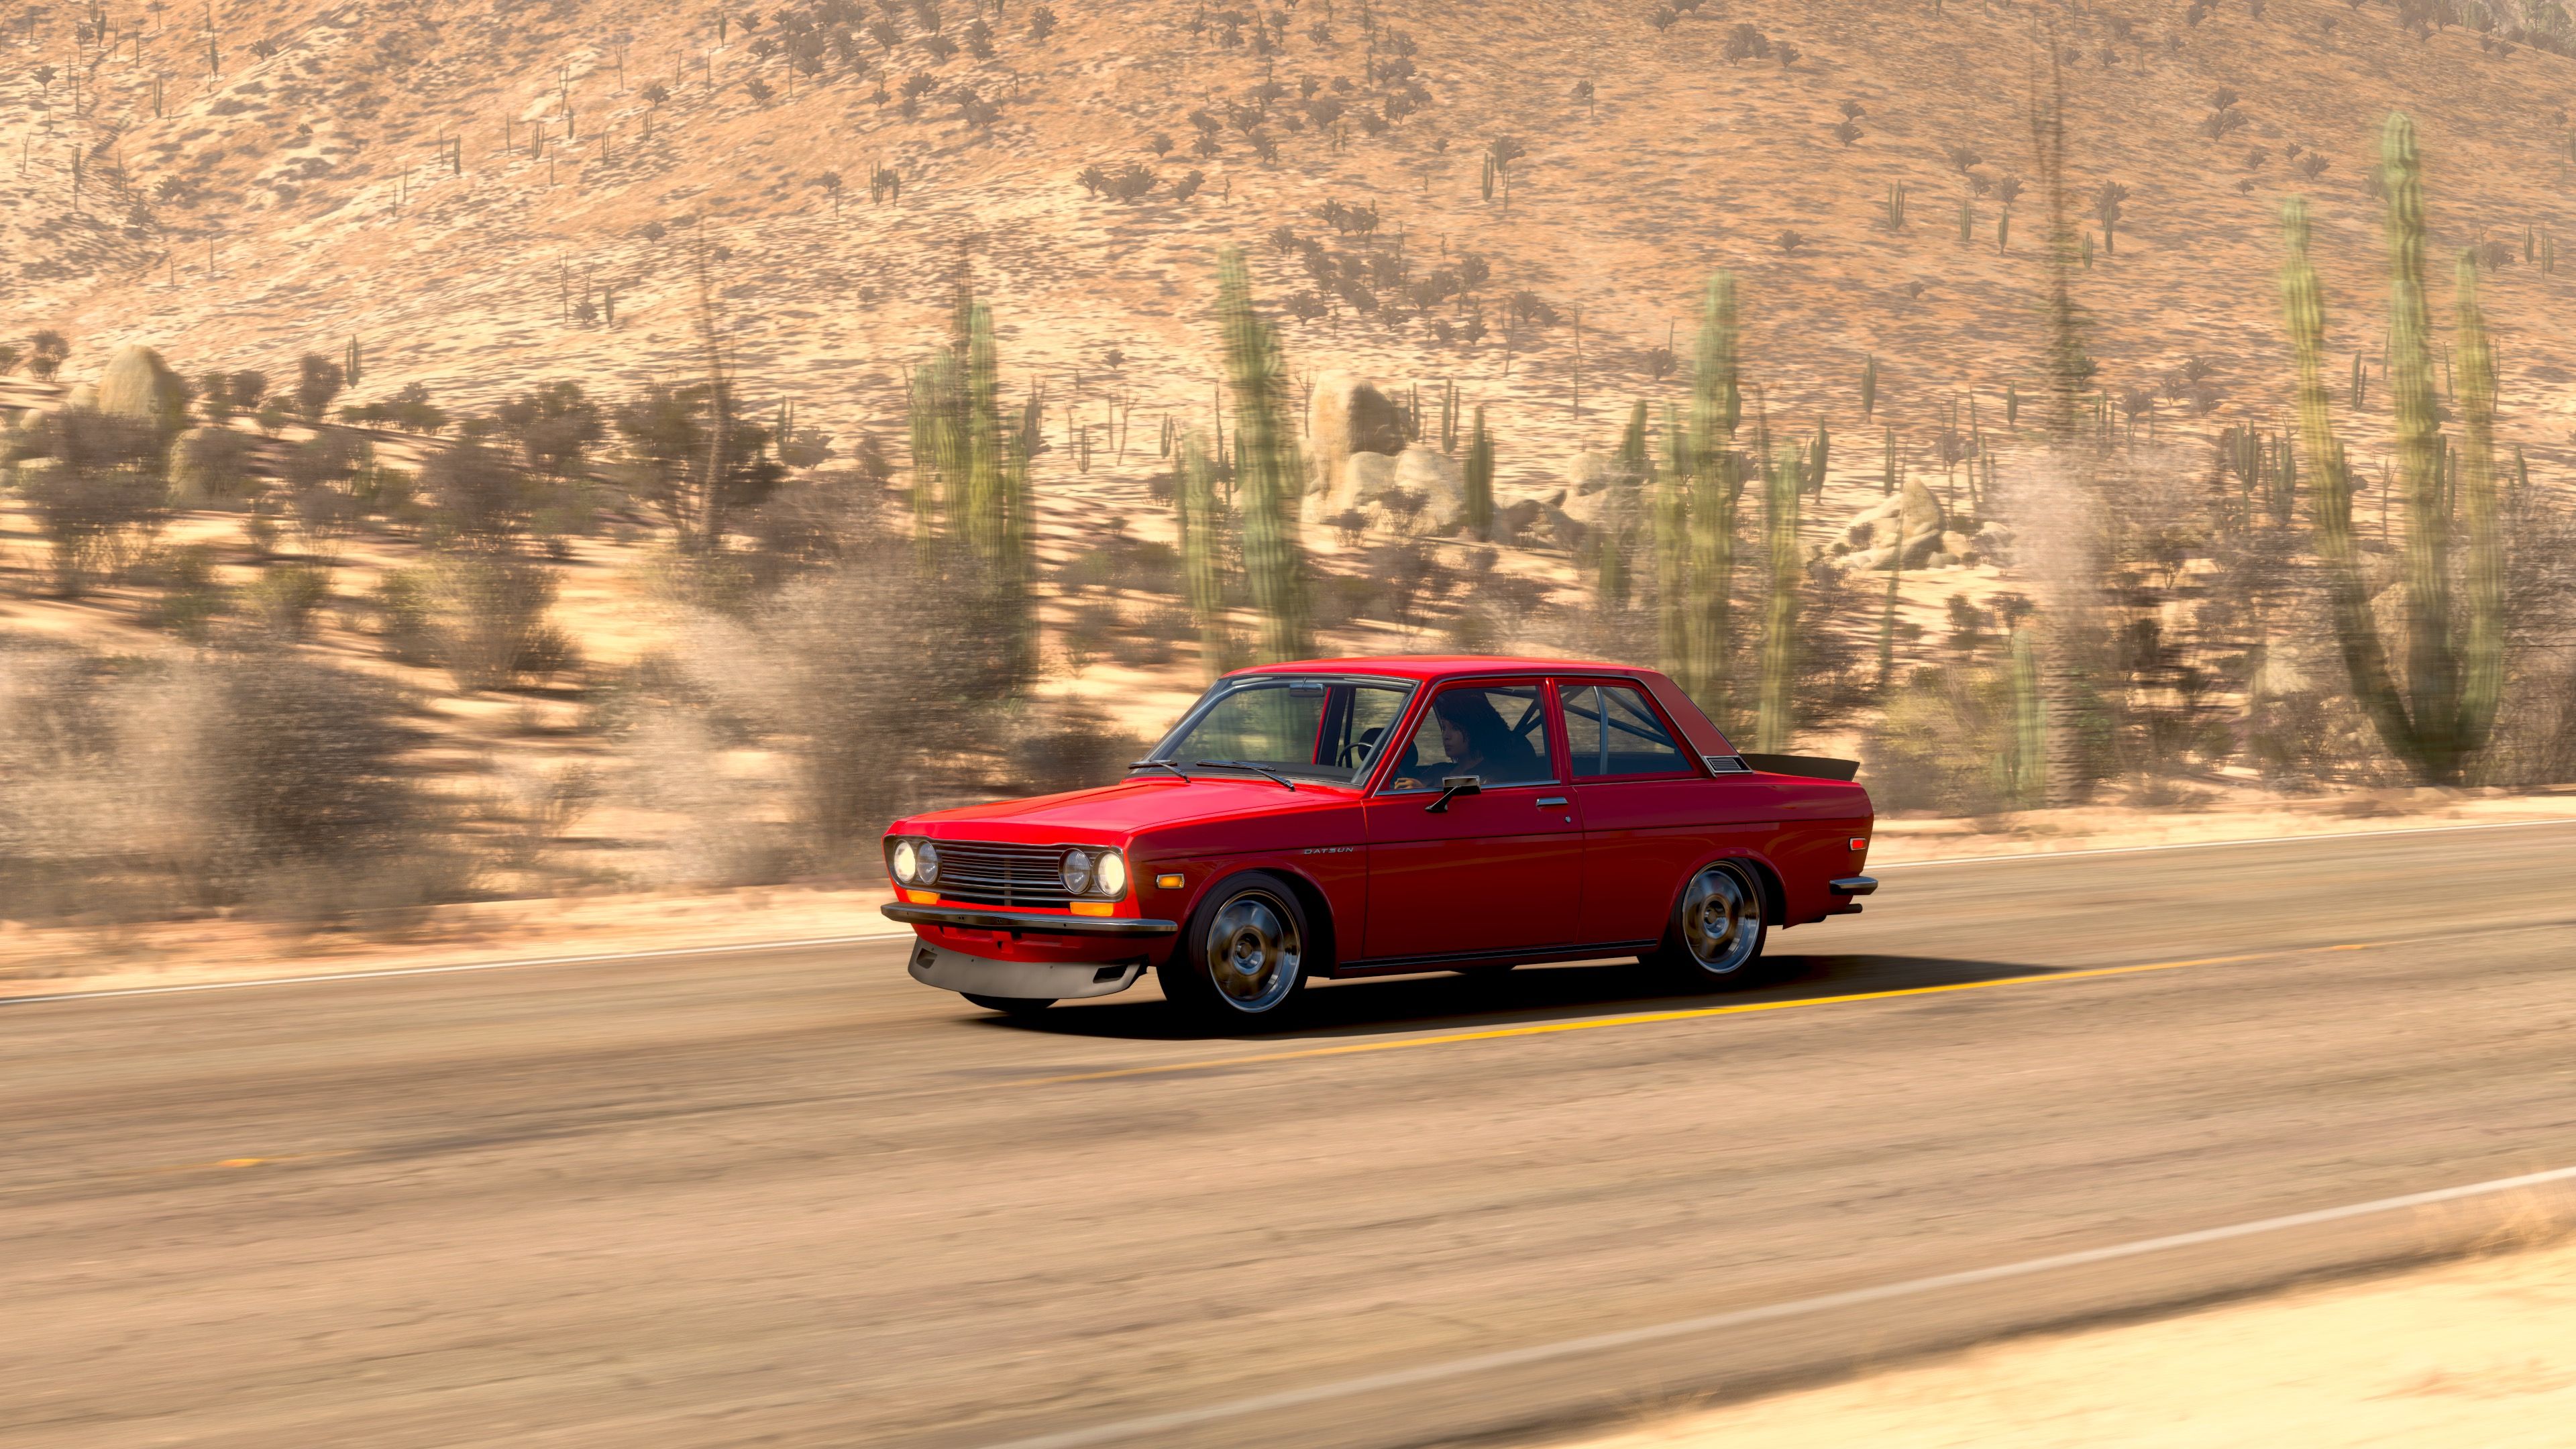 Another screenshot from Forza Horizon 5, showing my red Datsun 510 with big rims zooming along the road in the middle of the desert, there's lots of cactii and scrubby bushes on the side of the road.